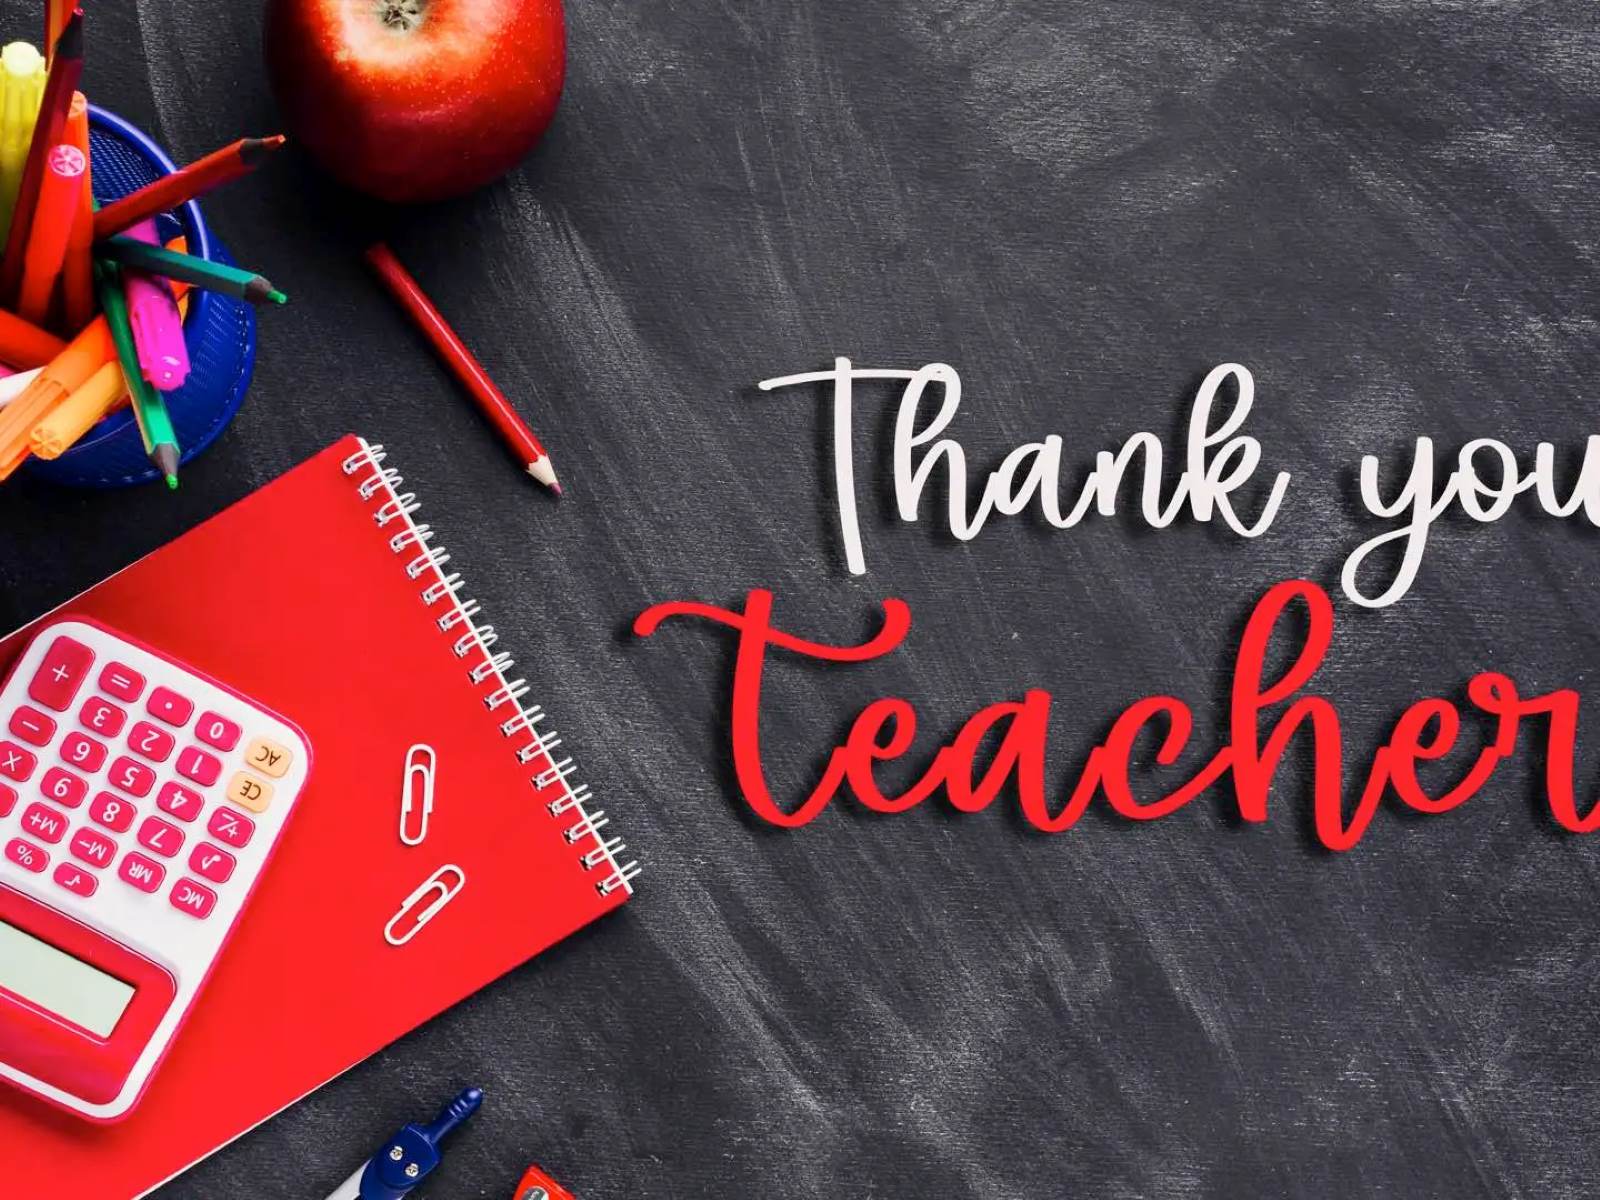 Creative Ways To Say Thank You For A Teacher’s Retirement